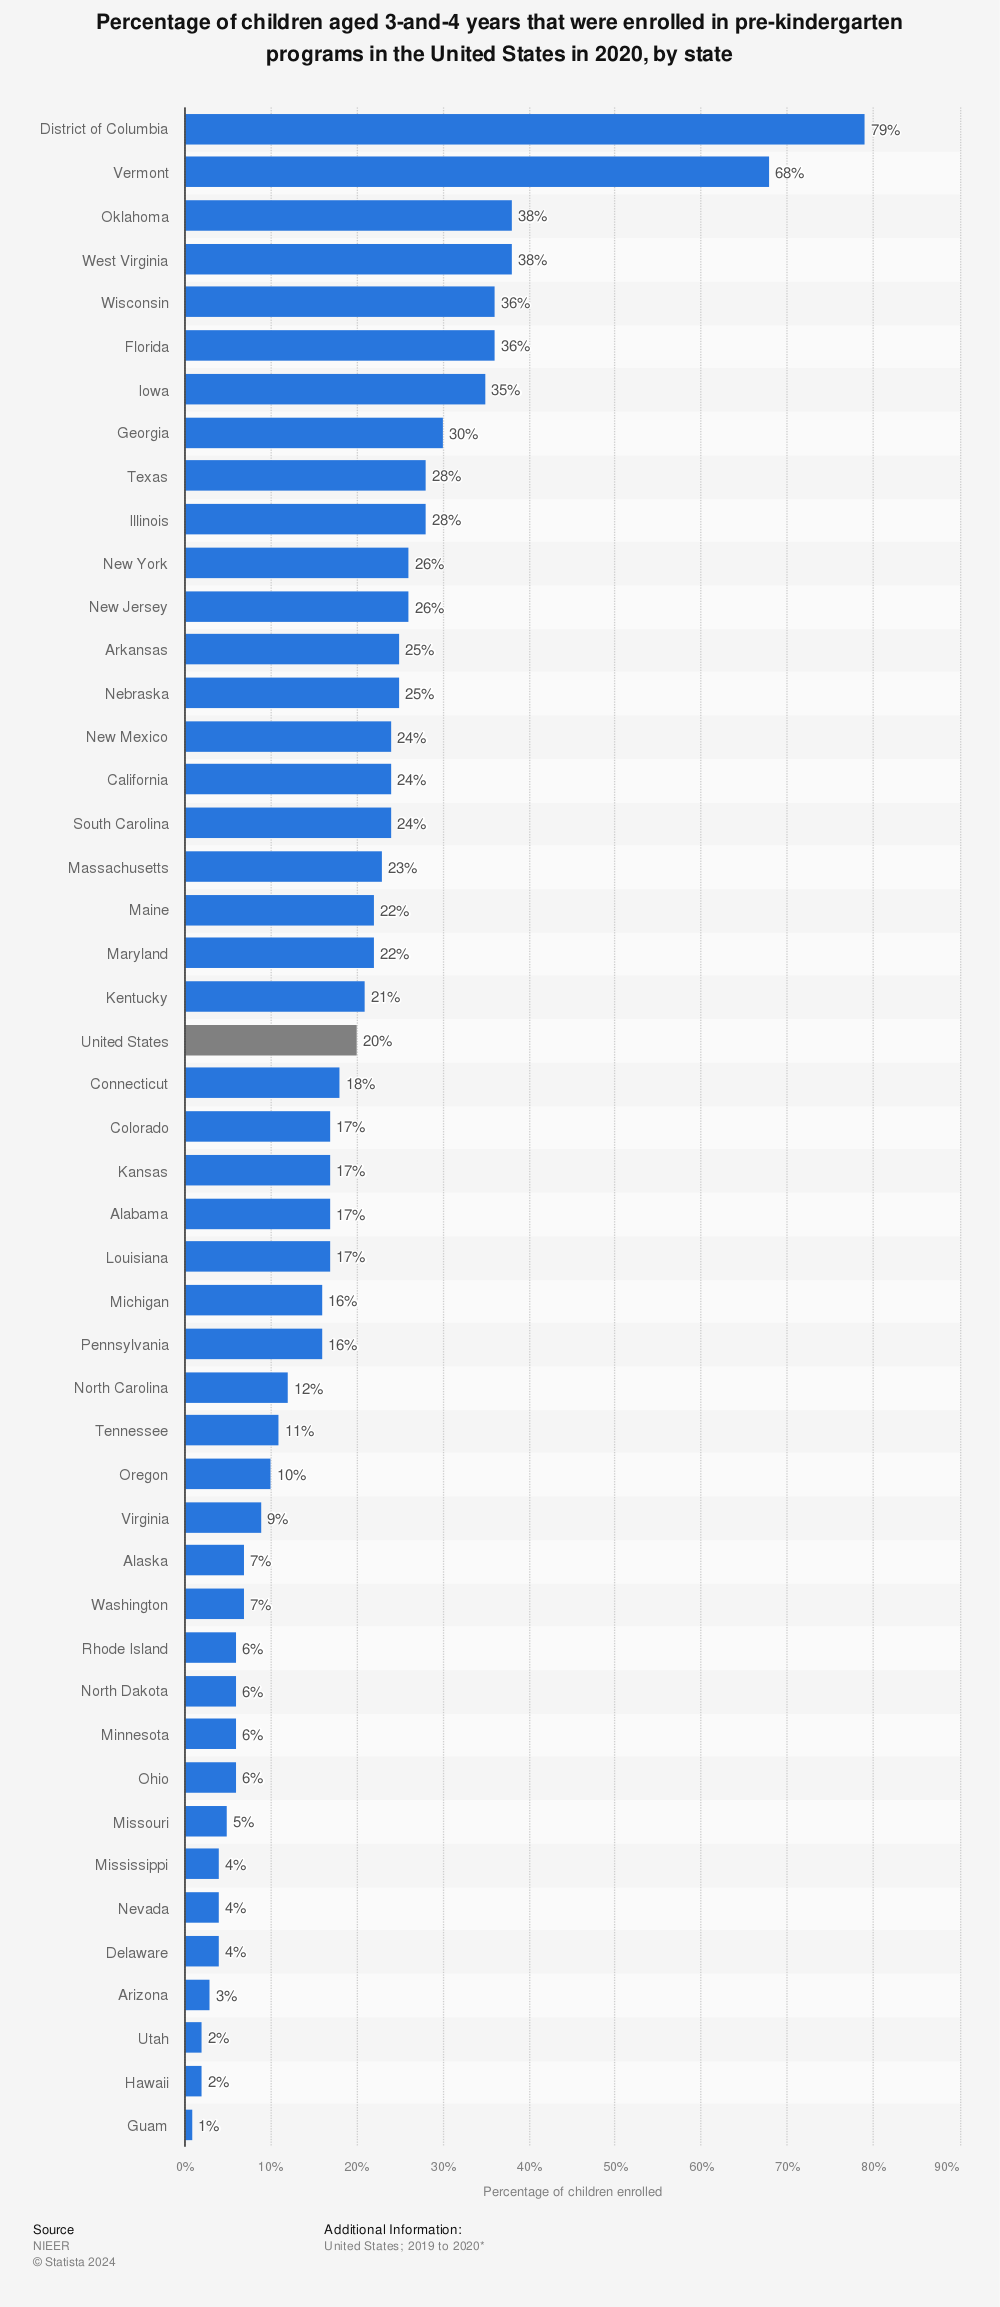 Statistic: Percentage of children aged 3-and-4 years that were enrolled in pre-kindergarten programs in the United States in 2020, by state  | Statista